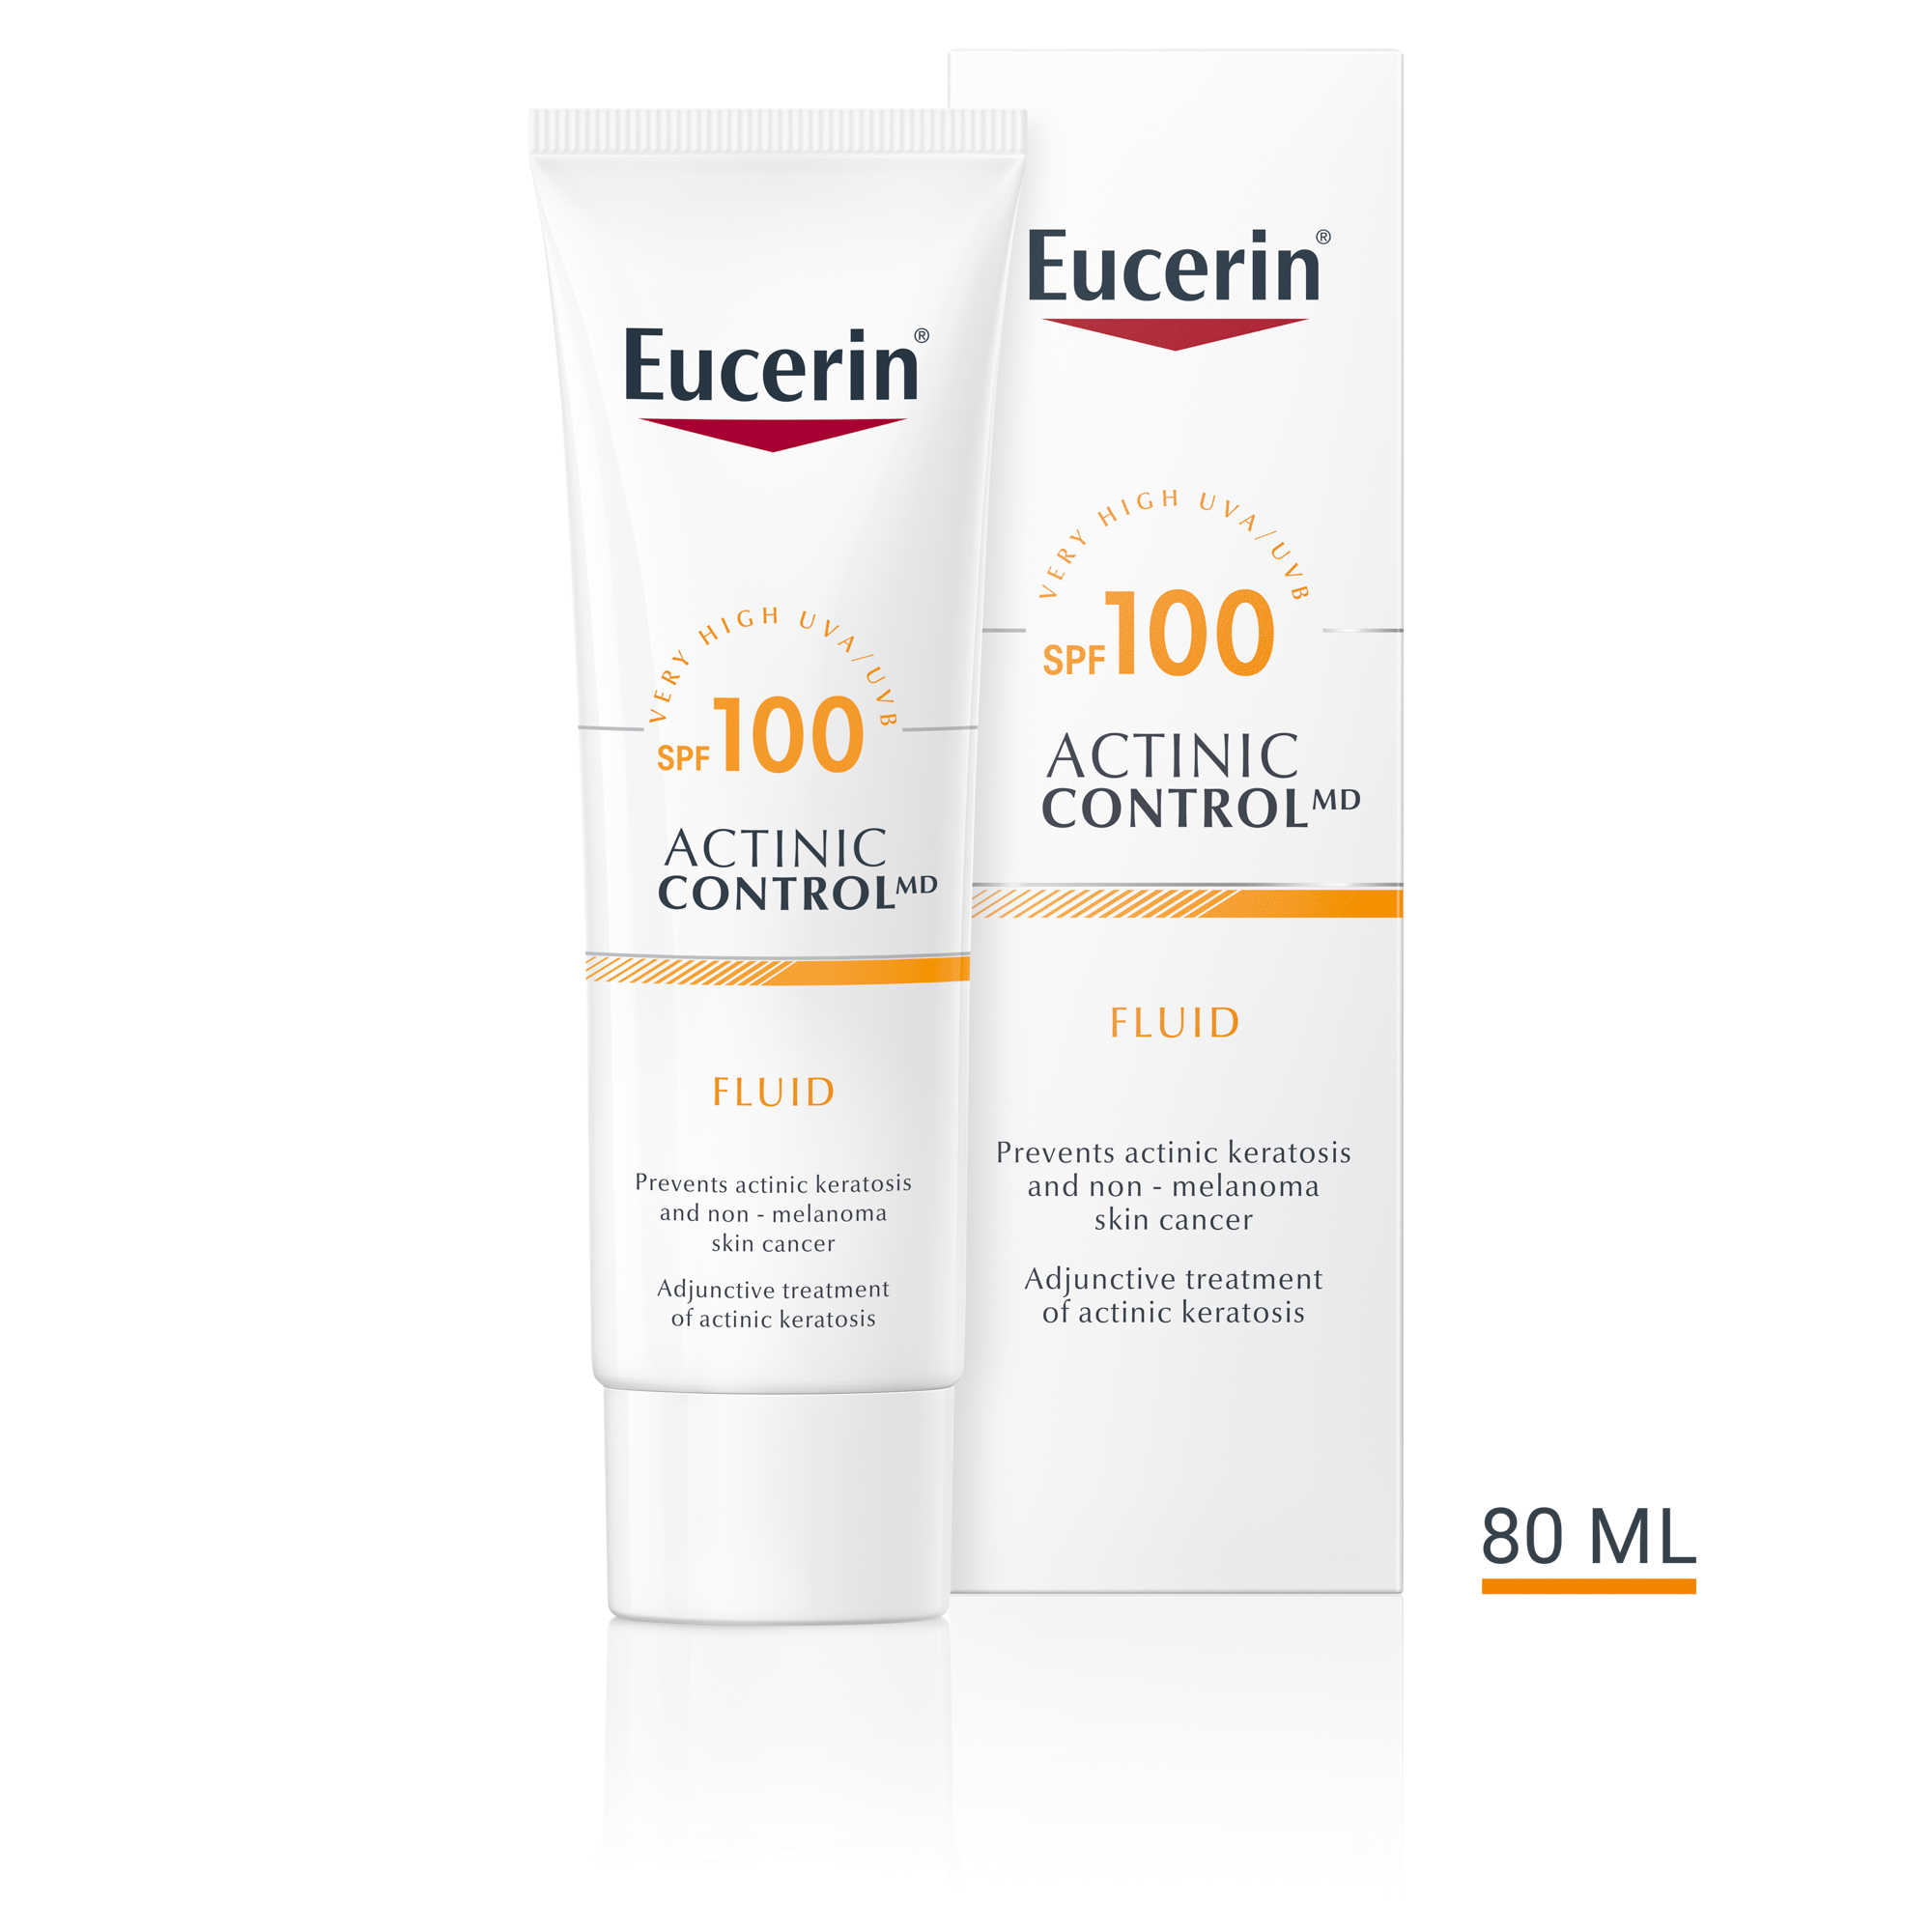 Actinic Control MD SPF100